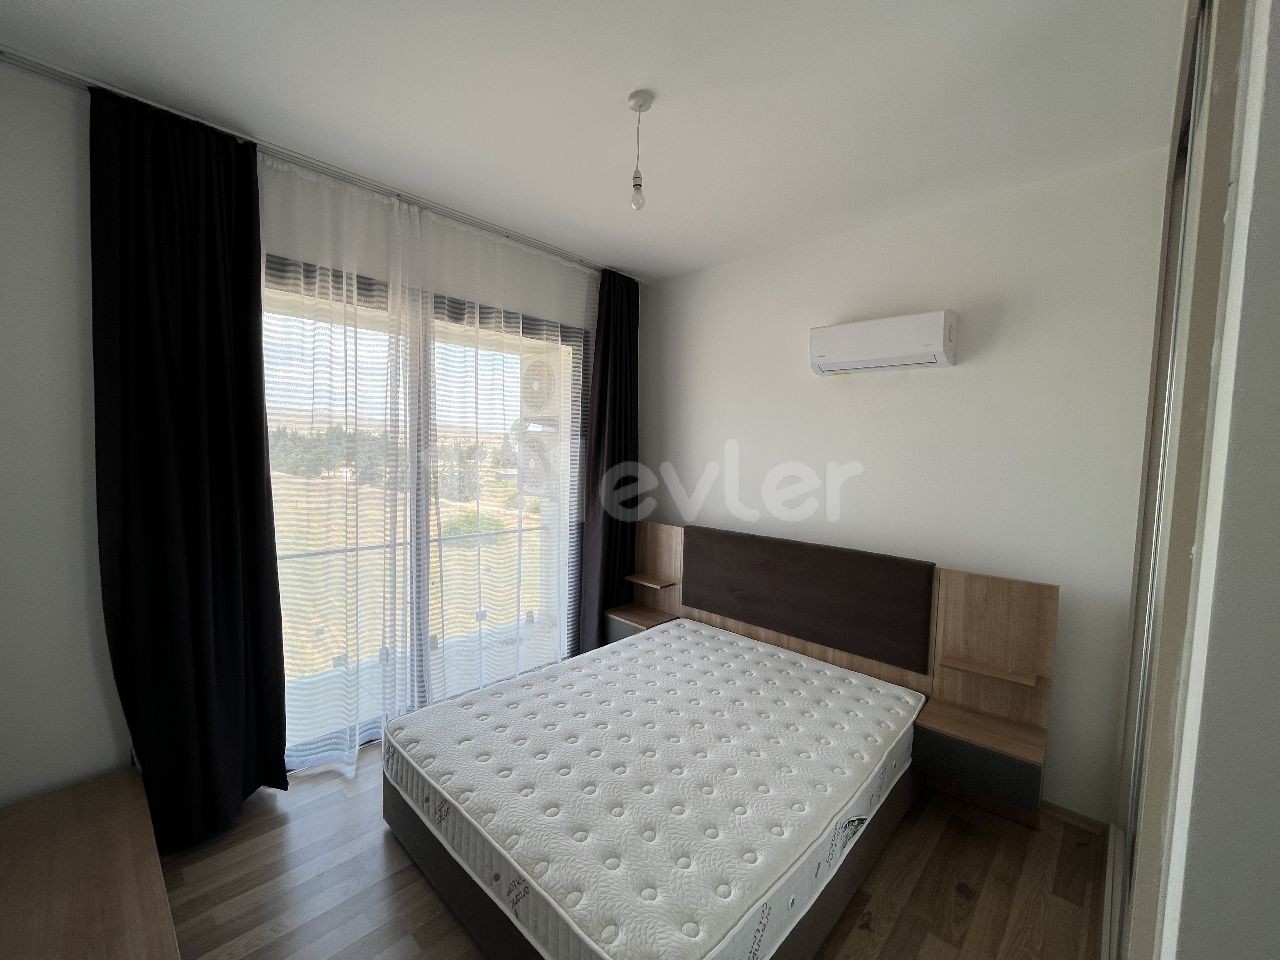 Güzelyurt Kalkanlı 2+1 flat for sale from the real estate agent of the site